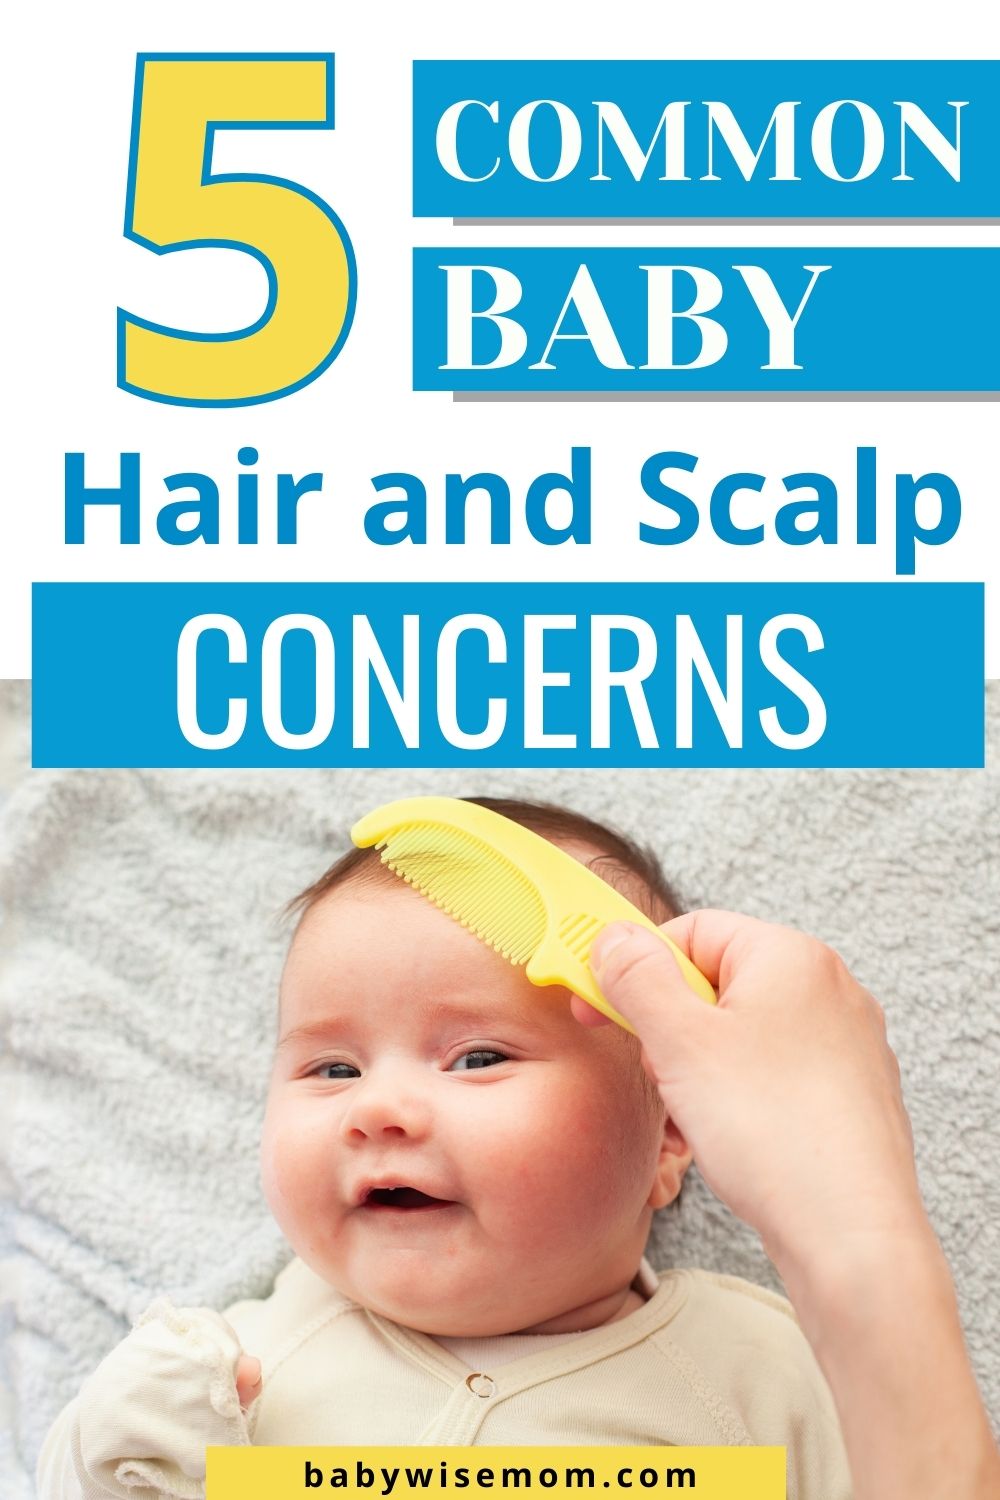 5 common baby hair and scalp concerns